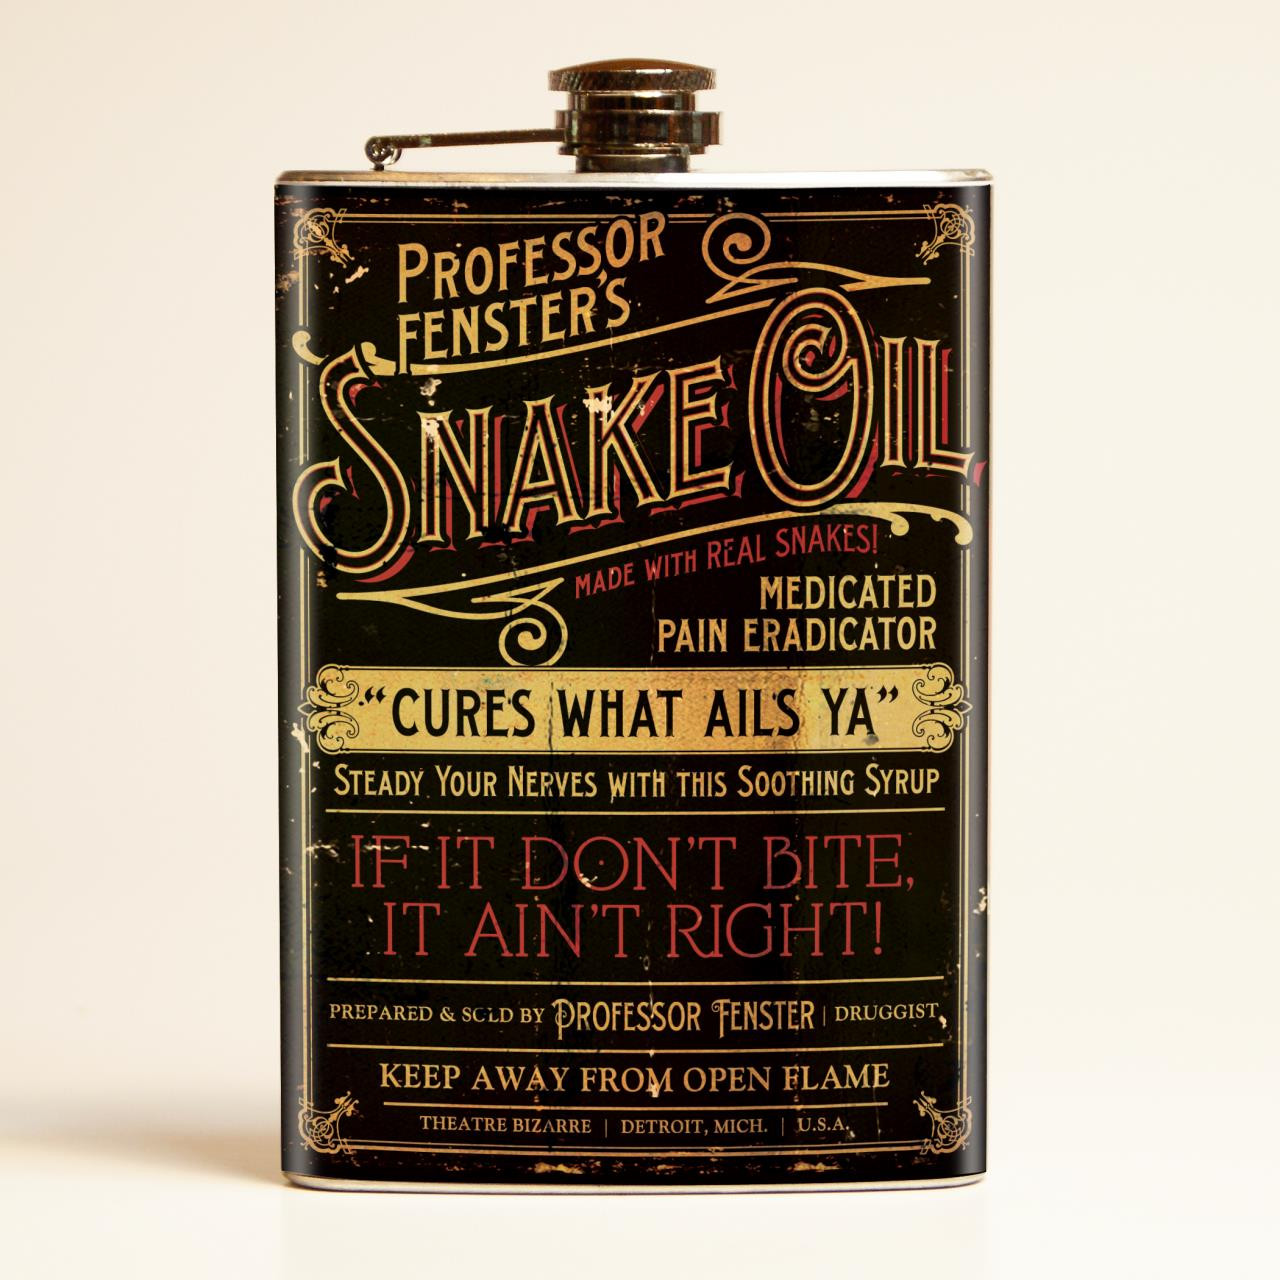 Theatre-Bizarre-Snake-Oil-Flask-OUT-OF-STOCK-FLWTBSO_image1__25696.1490638393.1280.1280.jpg